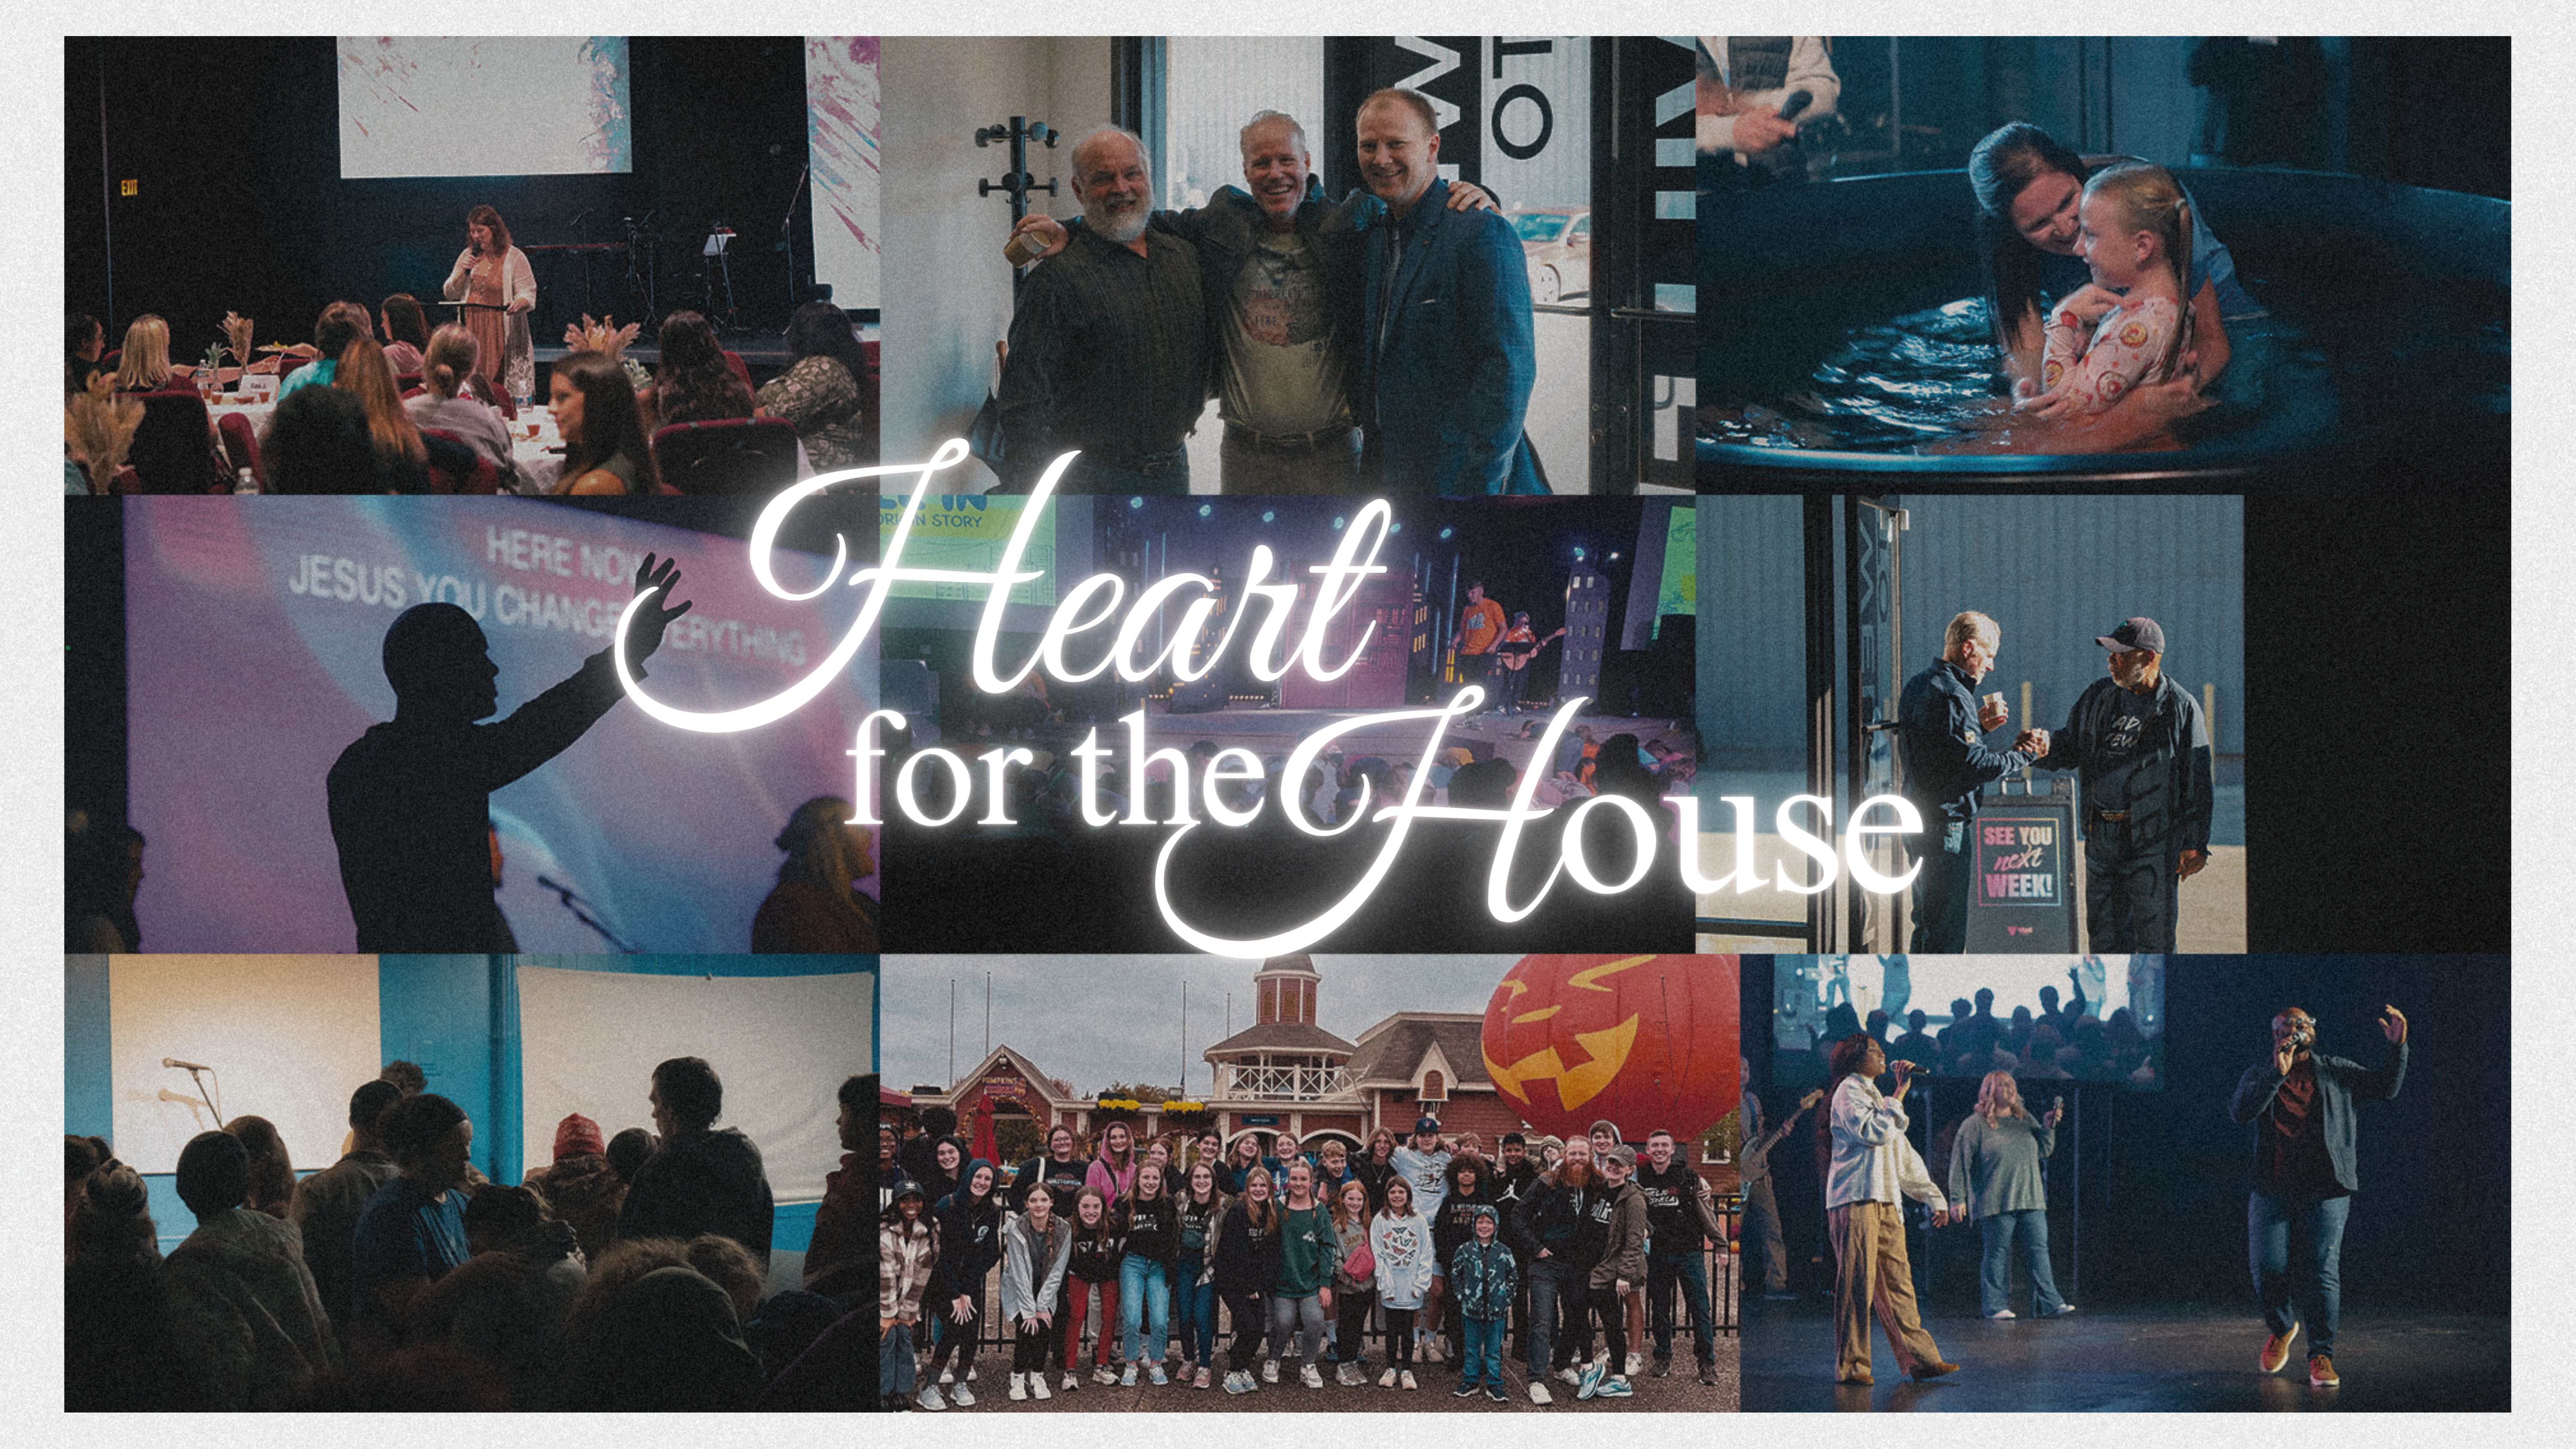 Heart for the House